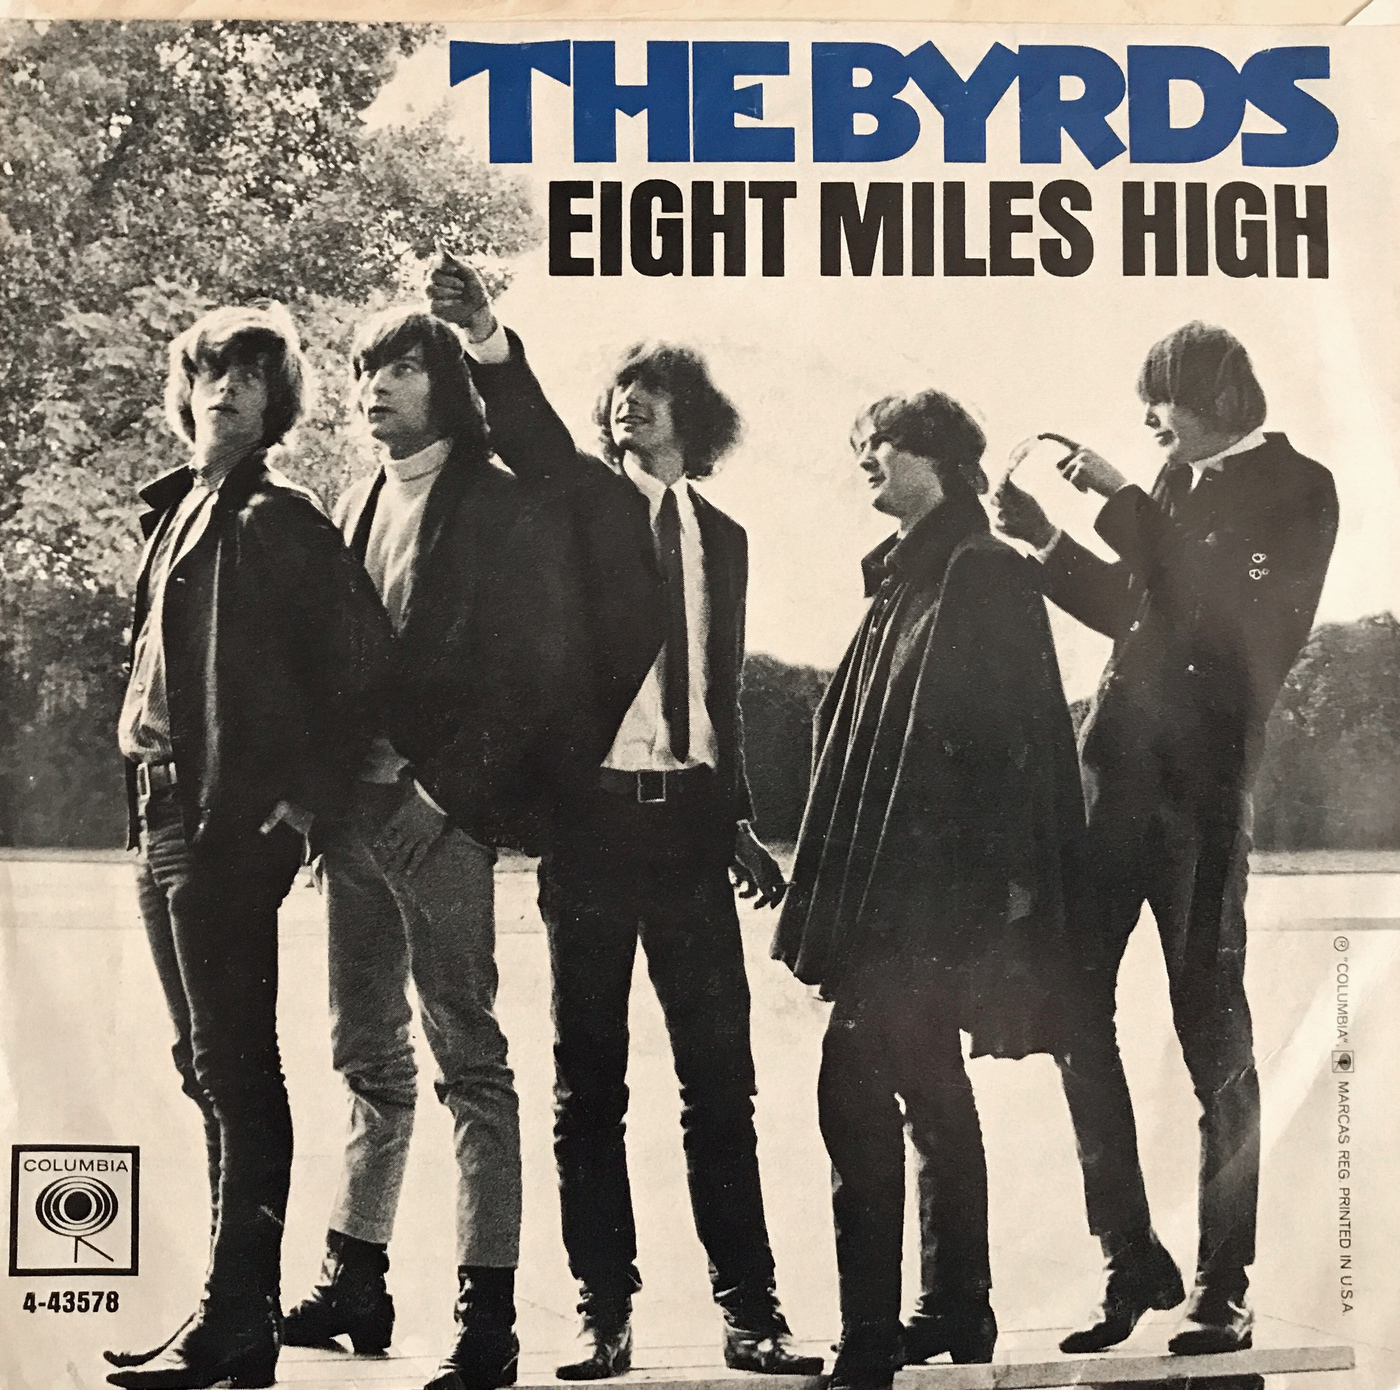 was eight miles high banned on radion on release